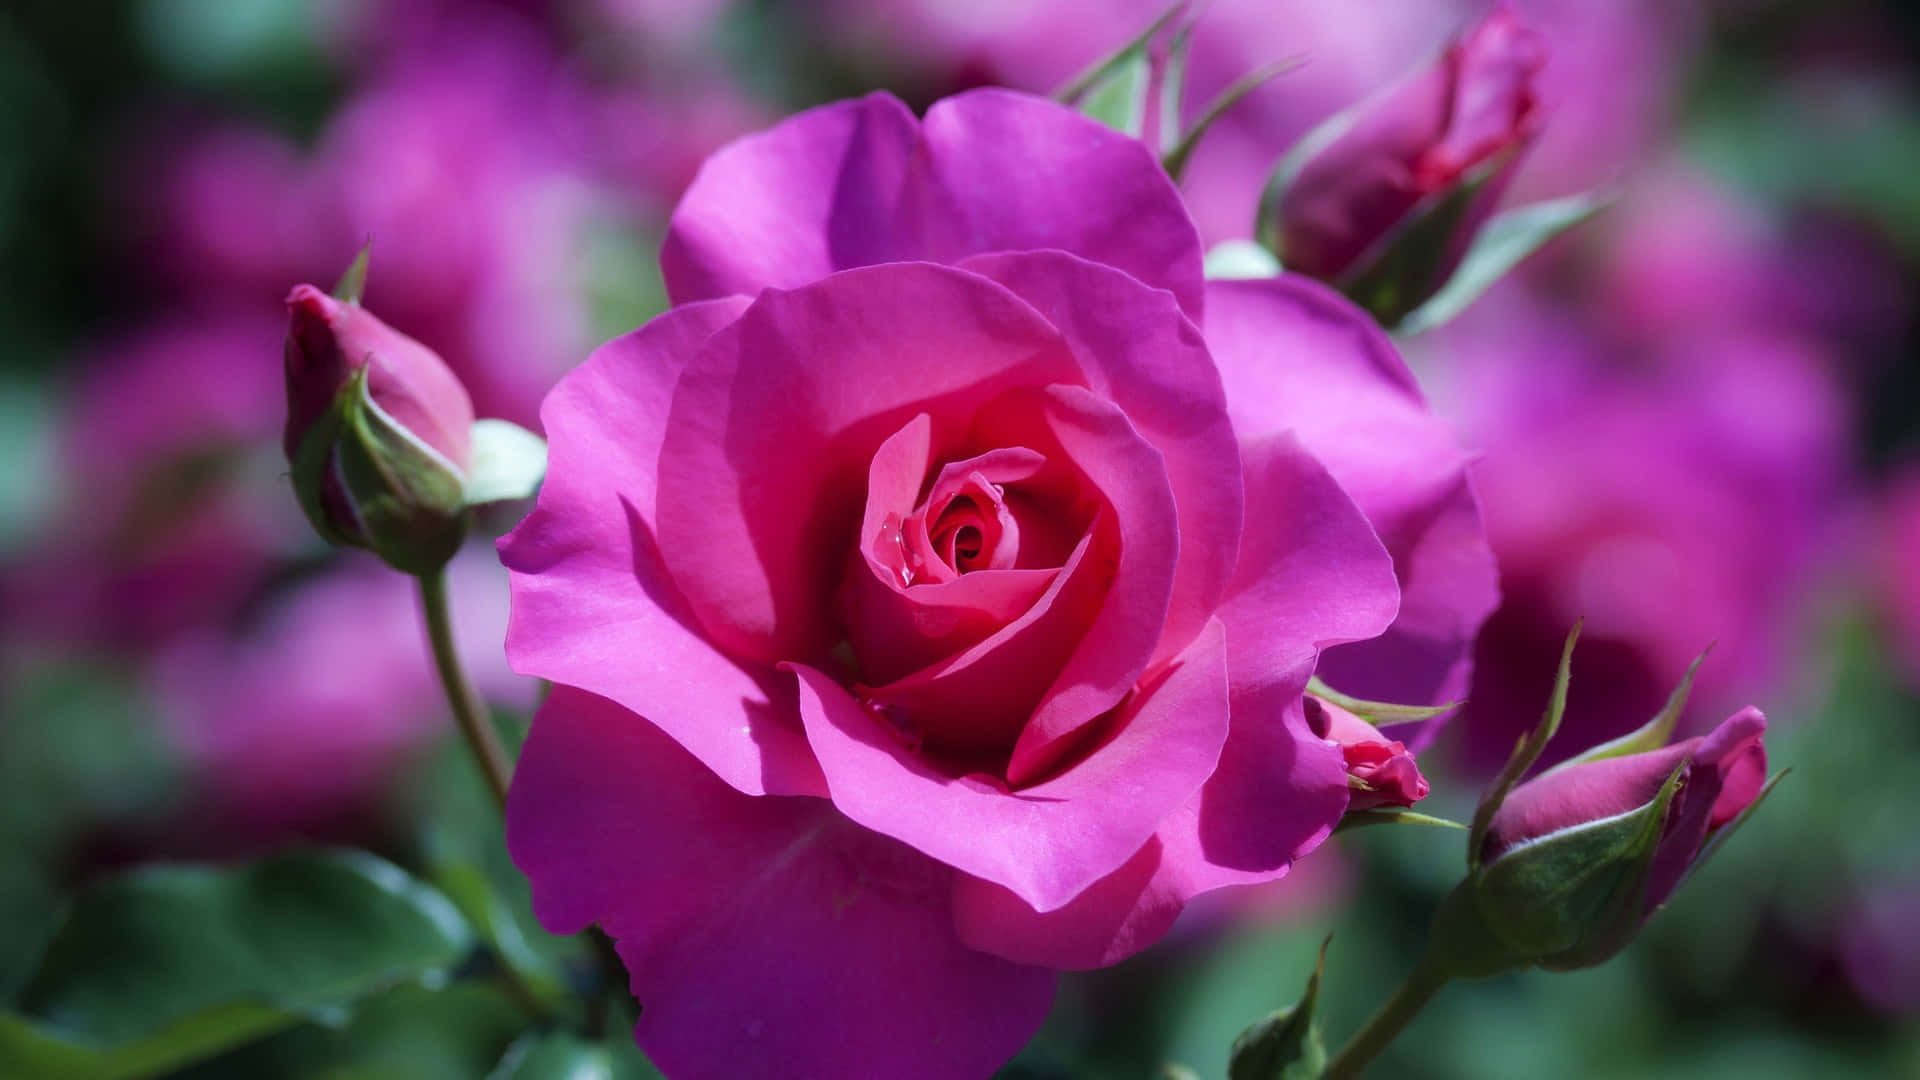 Brighten Your Day With A Beautiful Hd Rose